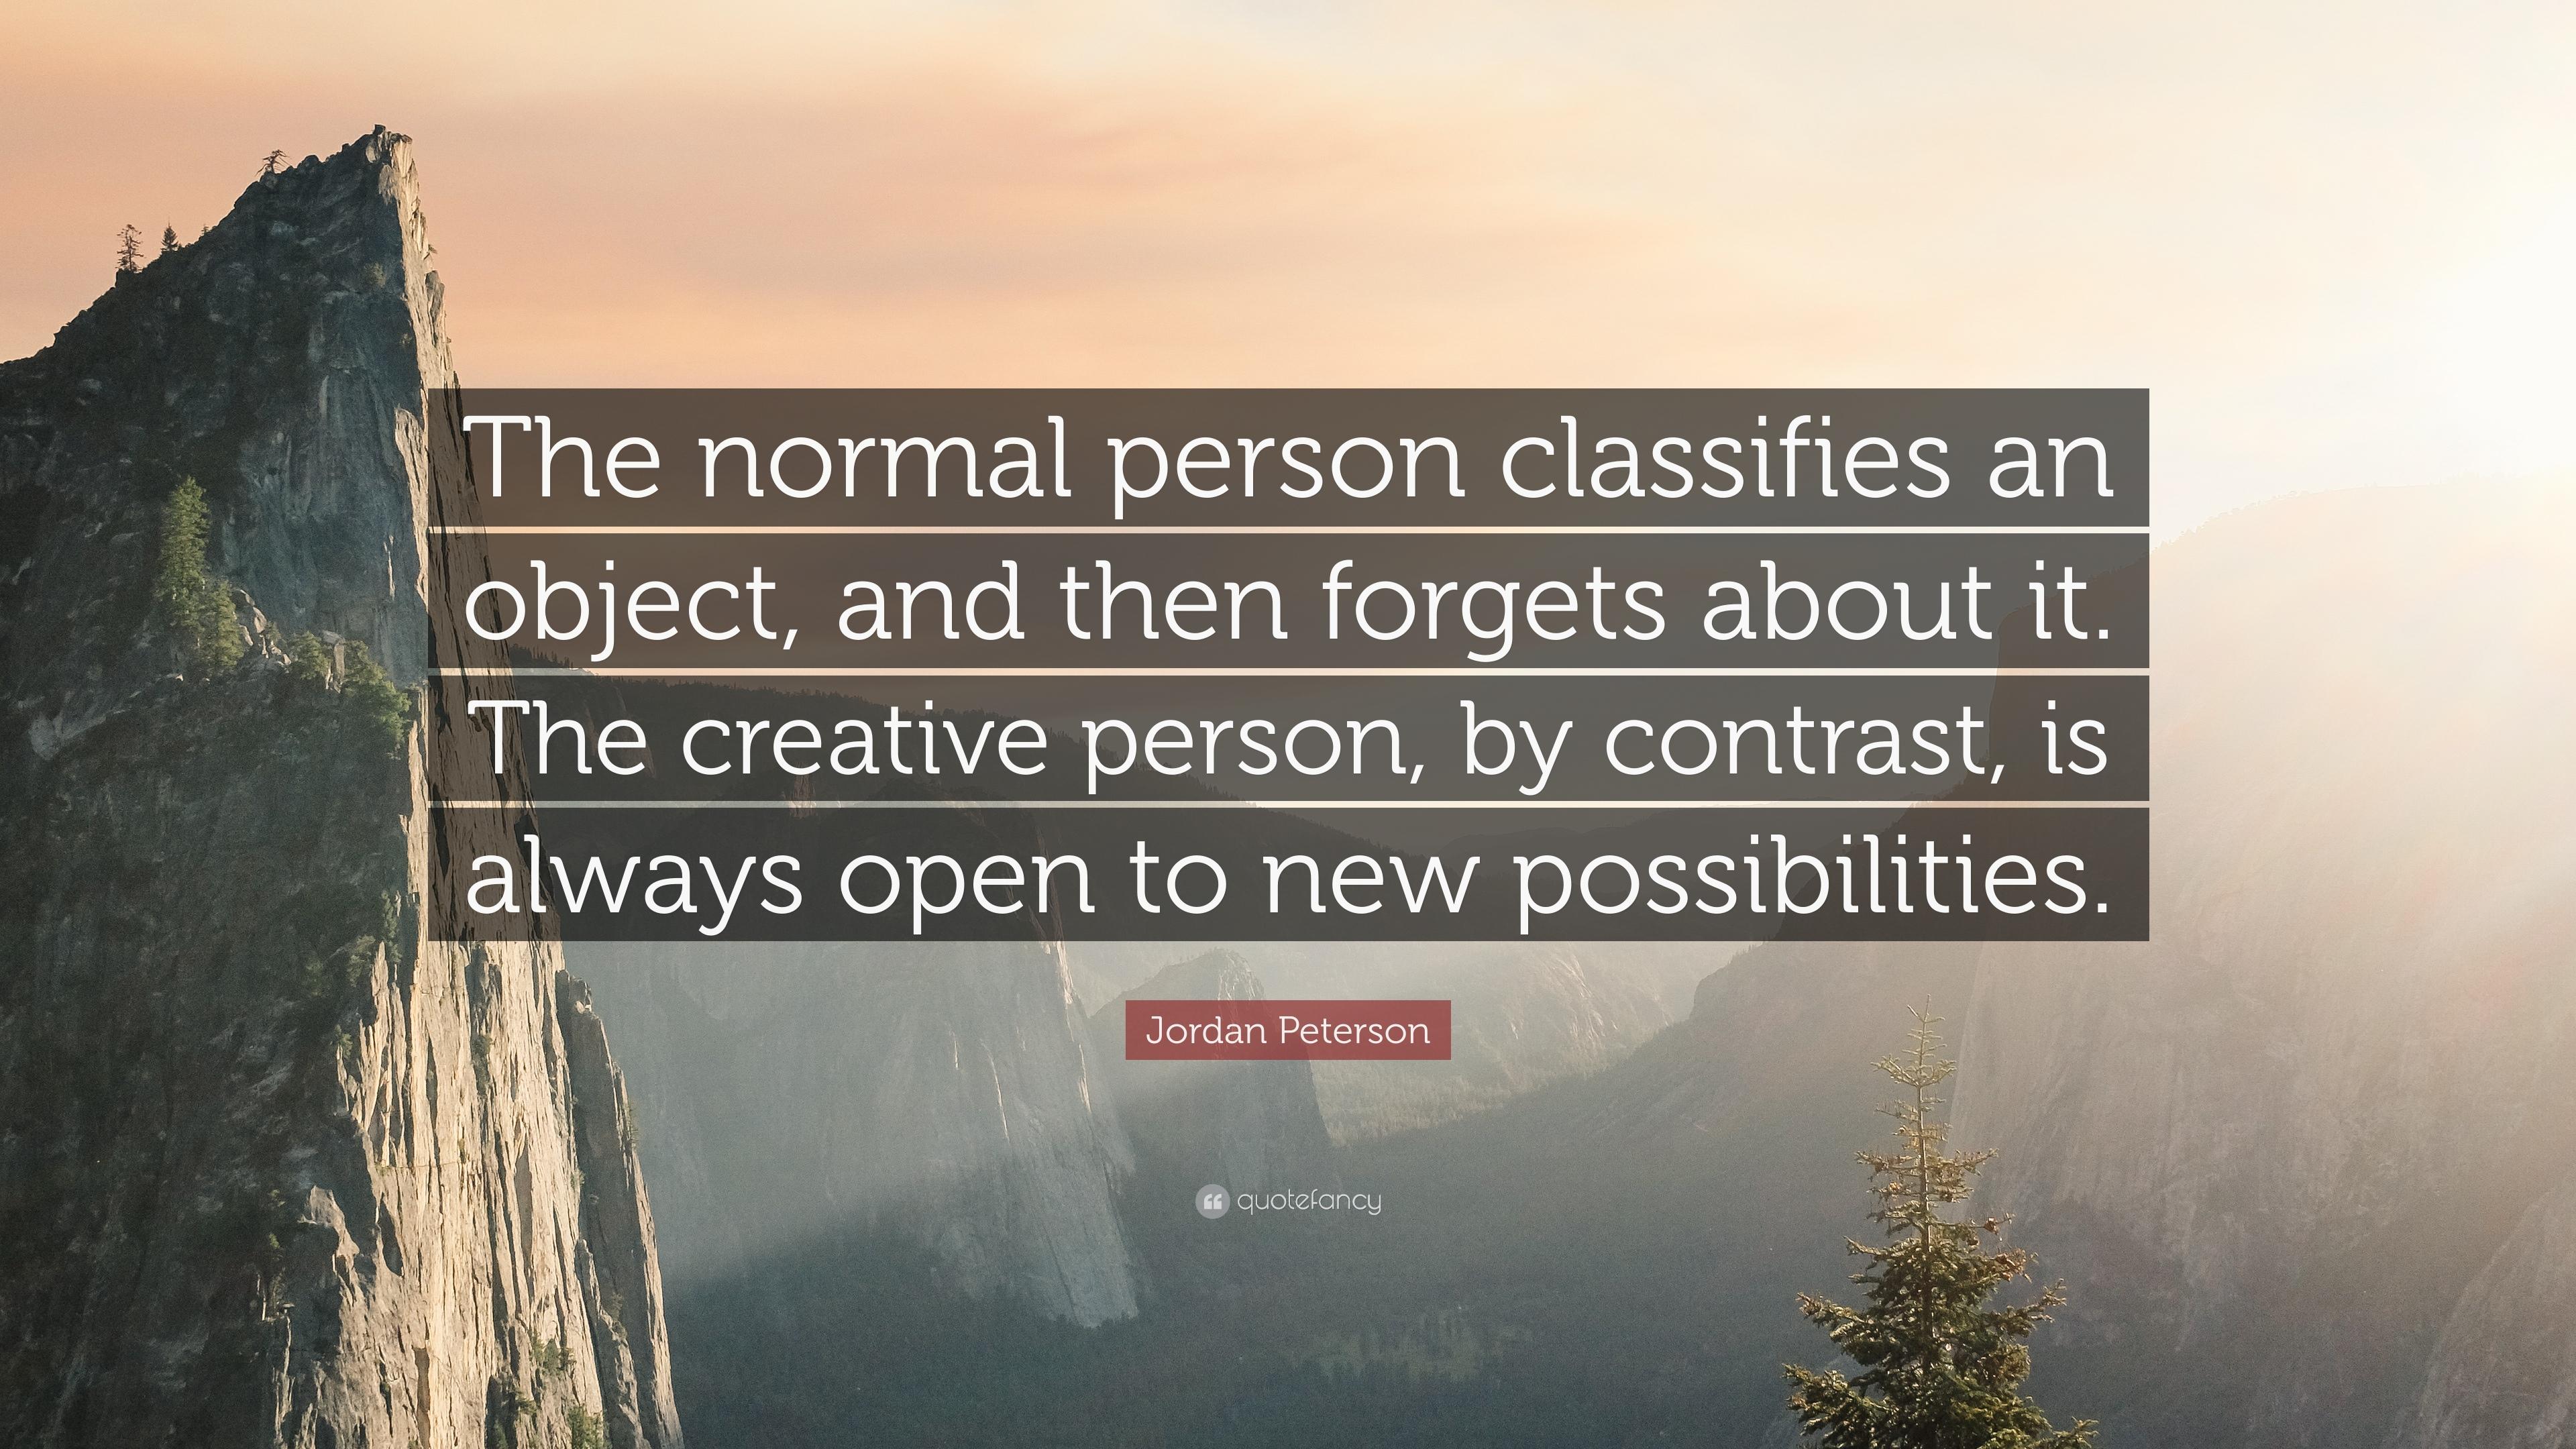 Jordan Peterson Quote: “The normal person classifies an object